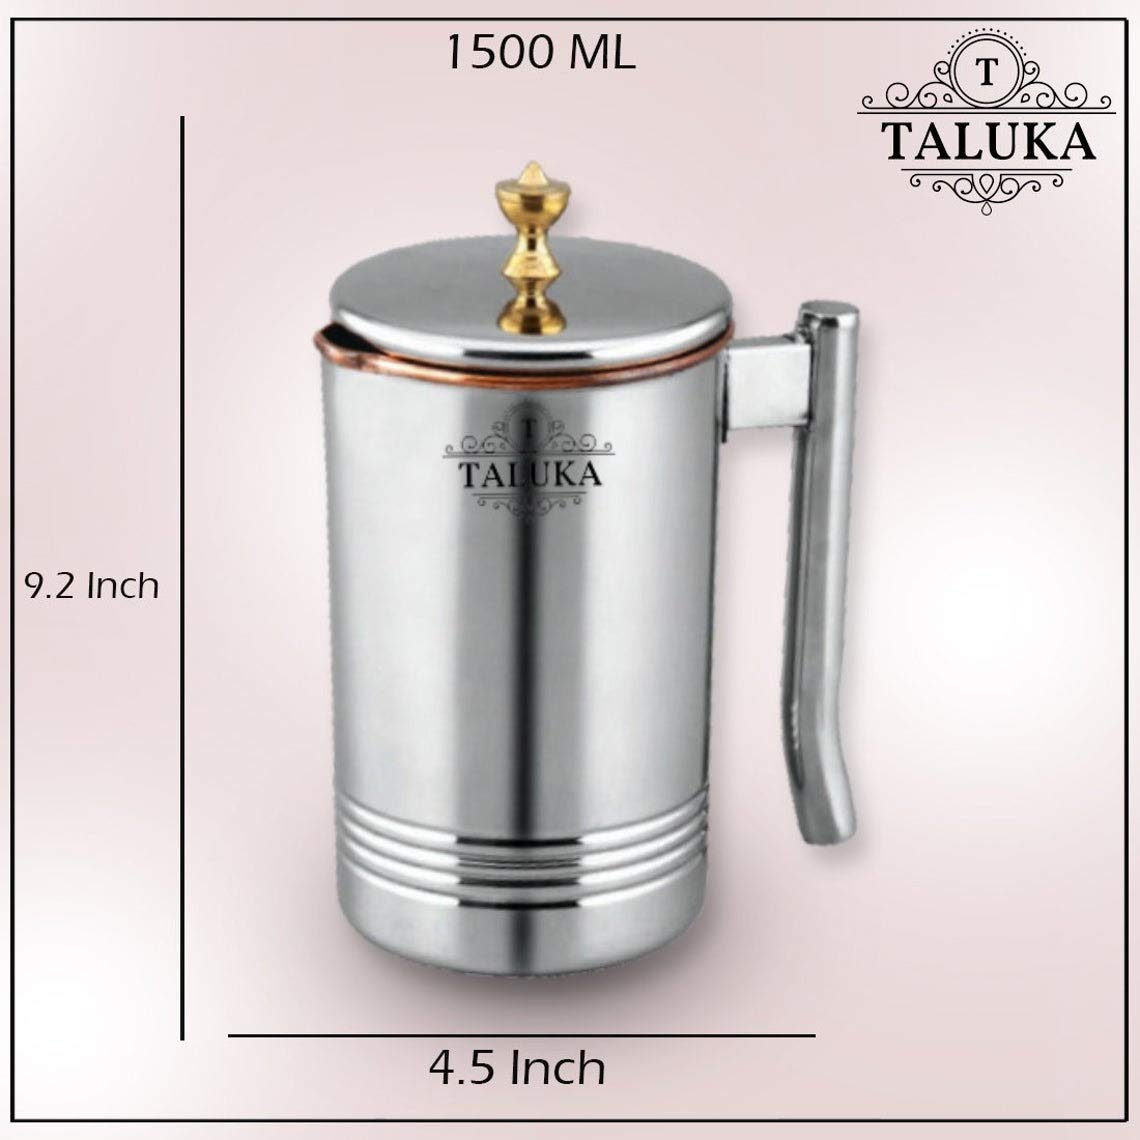 Taluka Copper Stainless Steel Jug Pitcher with Brass Knob, Storage and Serving Water Home Hotel Restaurant (1500 ML) with 2 Copper Glass